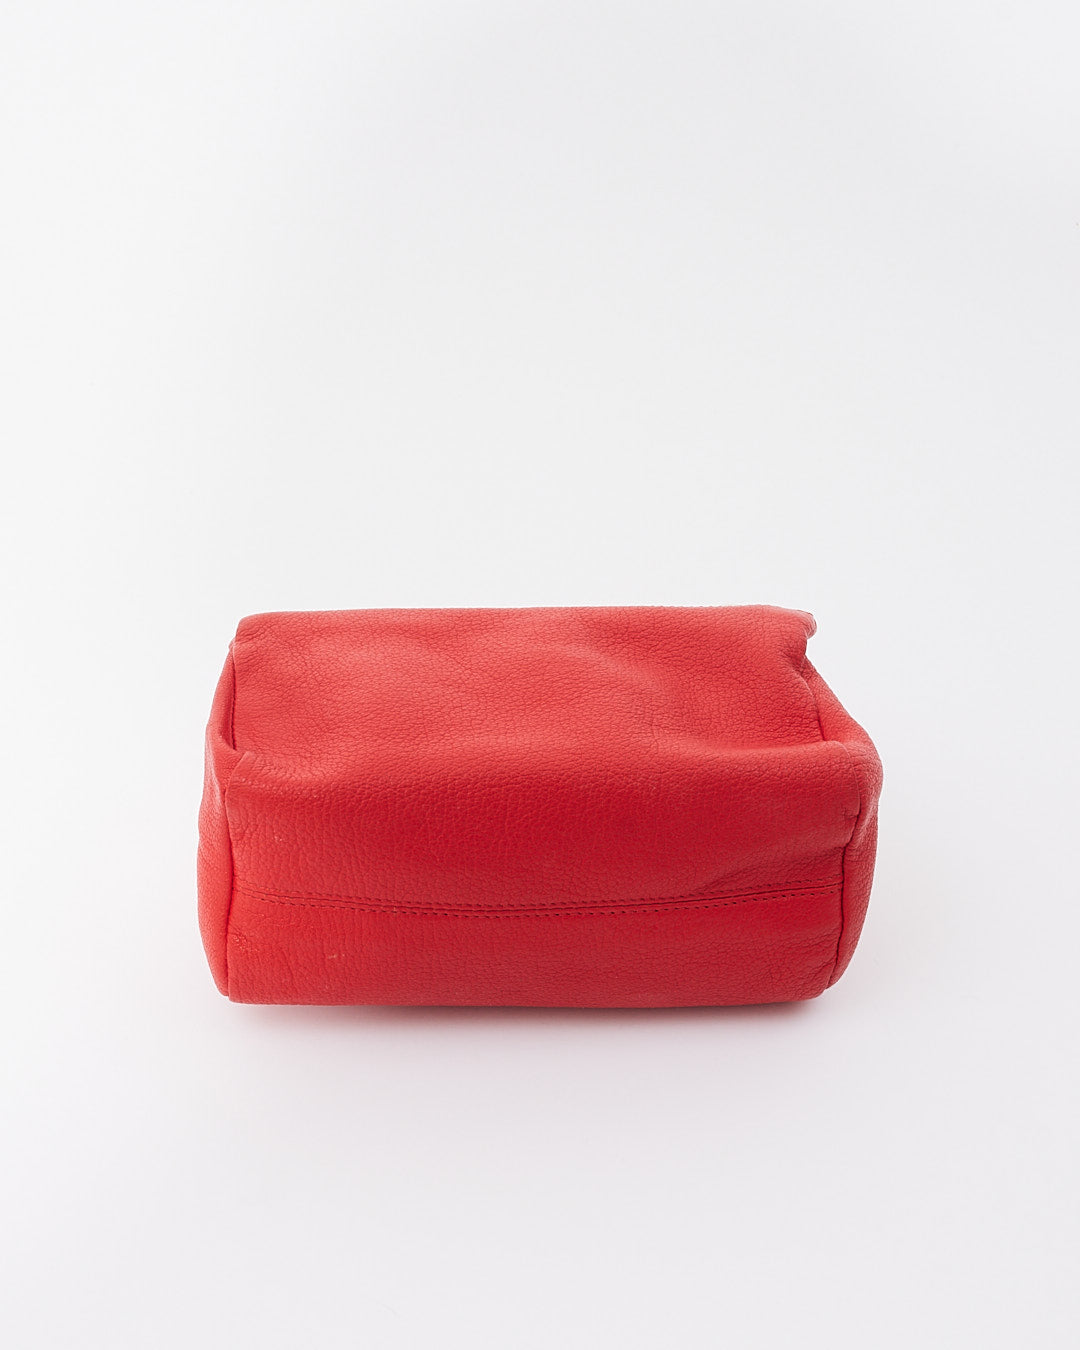 Givenchy Red Leather Pandora Wristlet Clutch